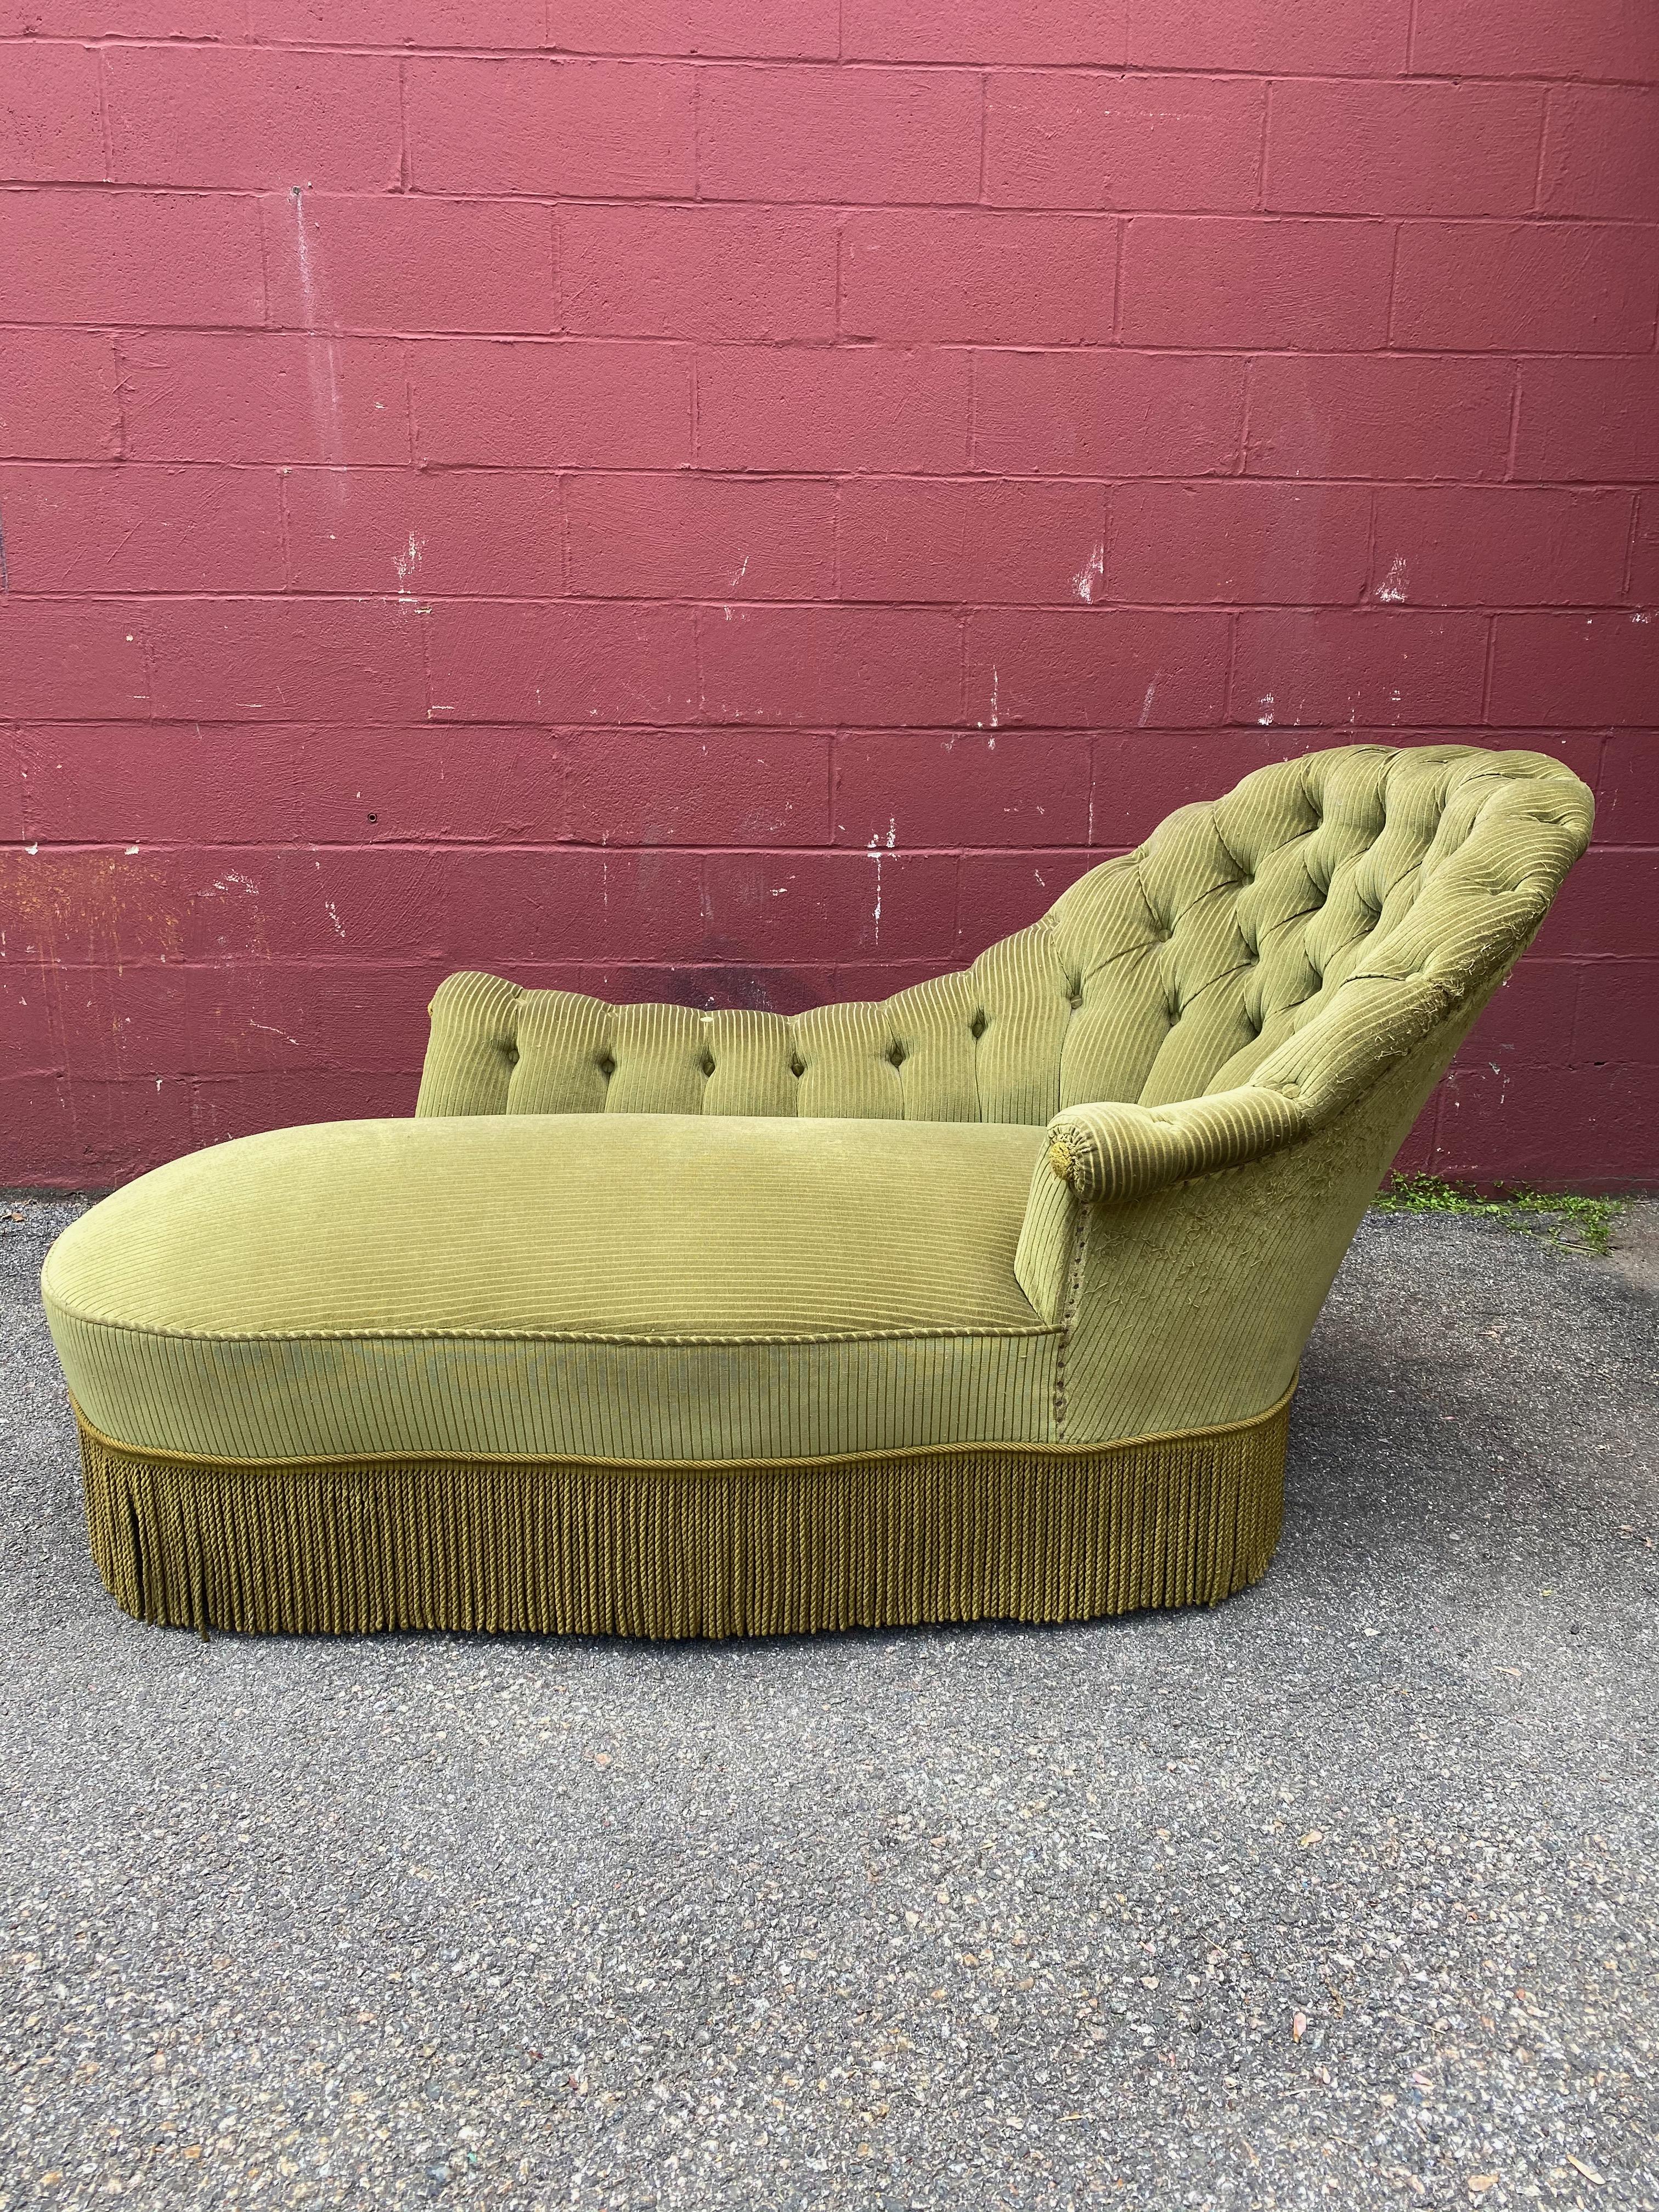 green chaise lounge vintage